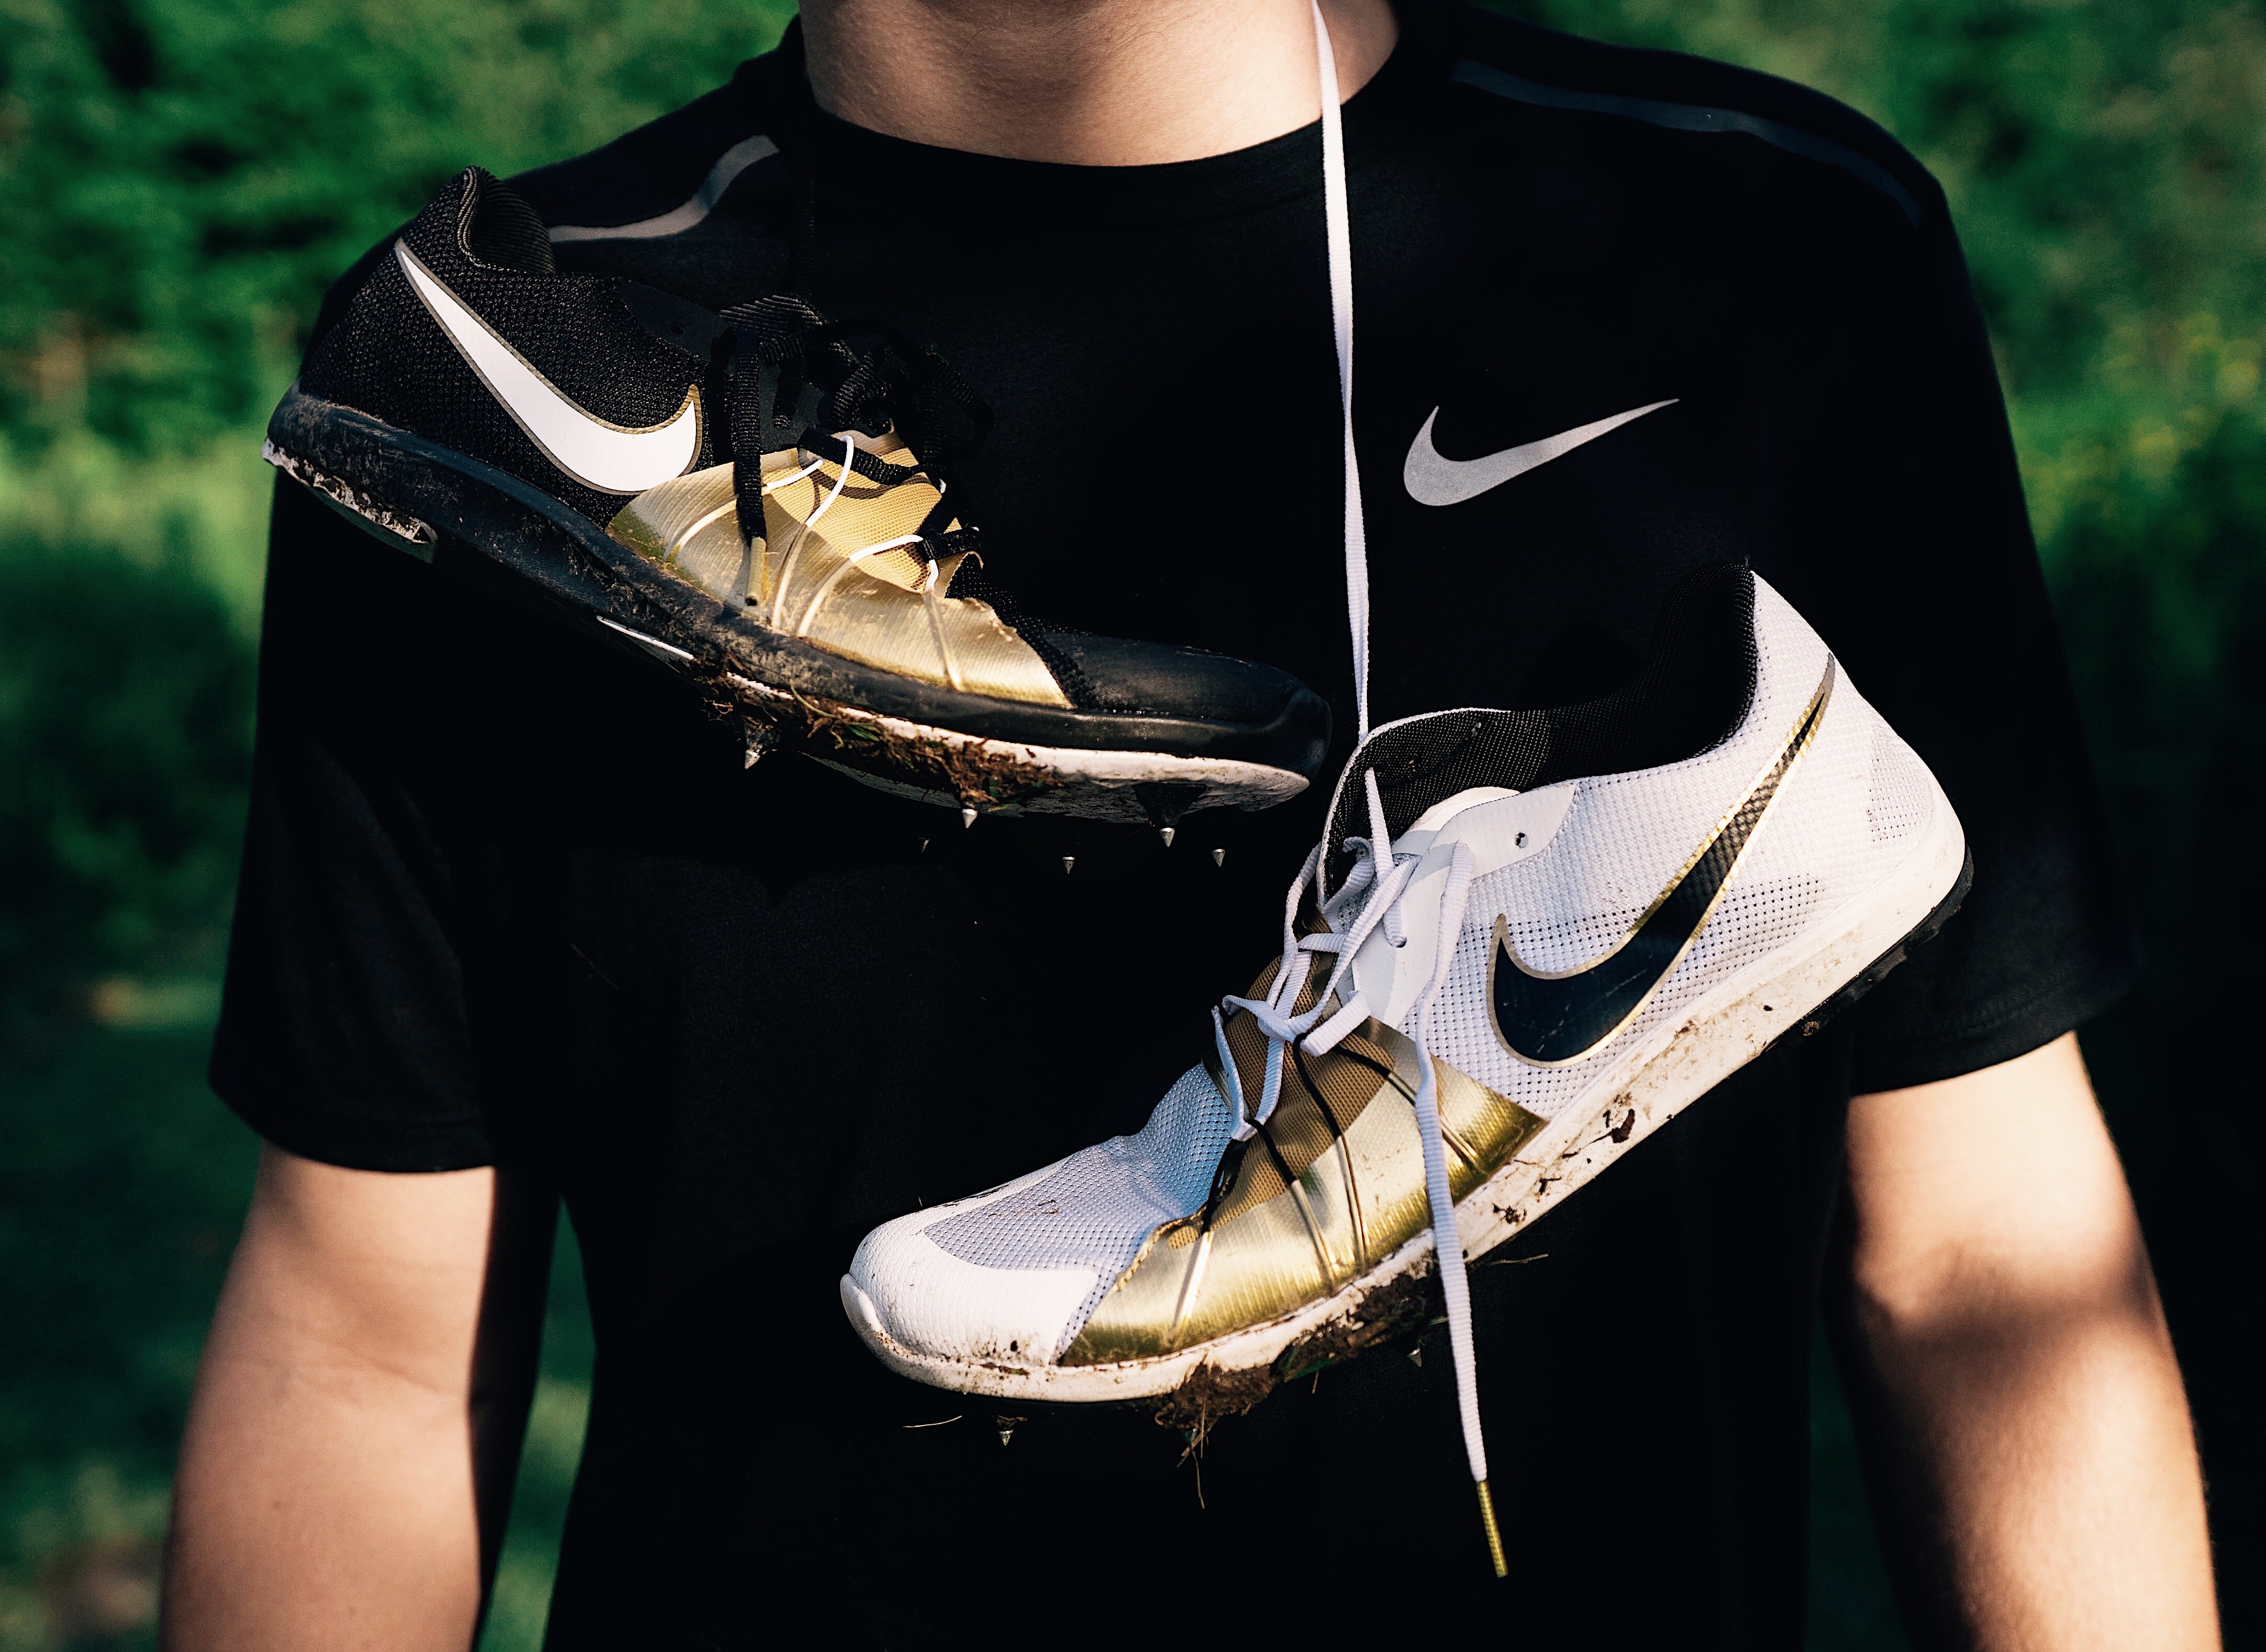 Nike Gold Medal Spikes